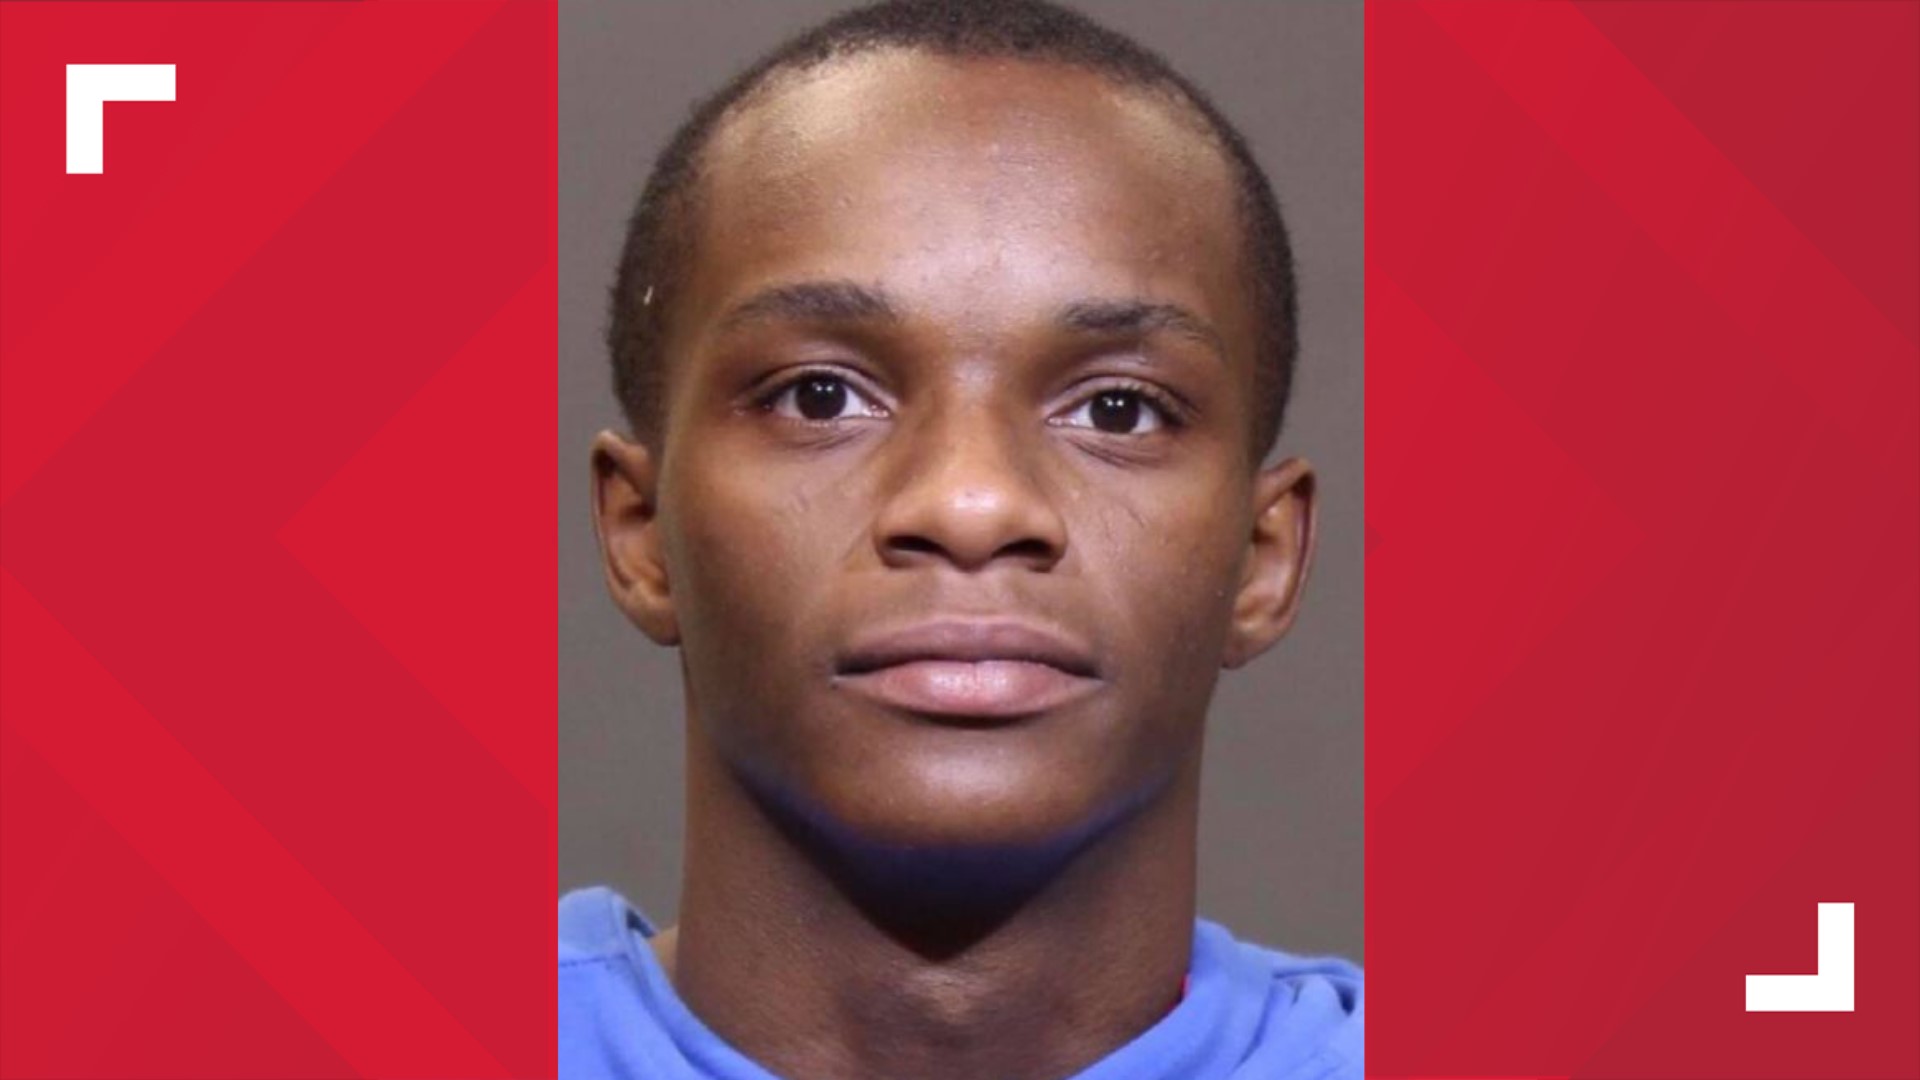 Anthony Truss Jr. was sentenced to 11-15 years in prison for his role in the shootout on March 3.